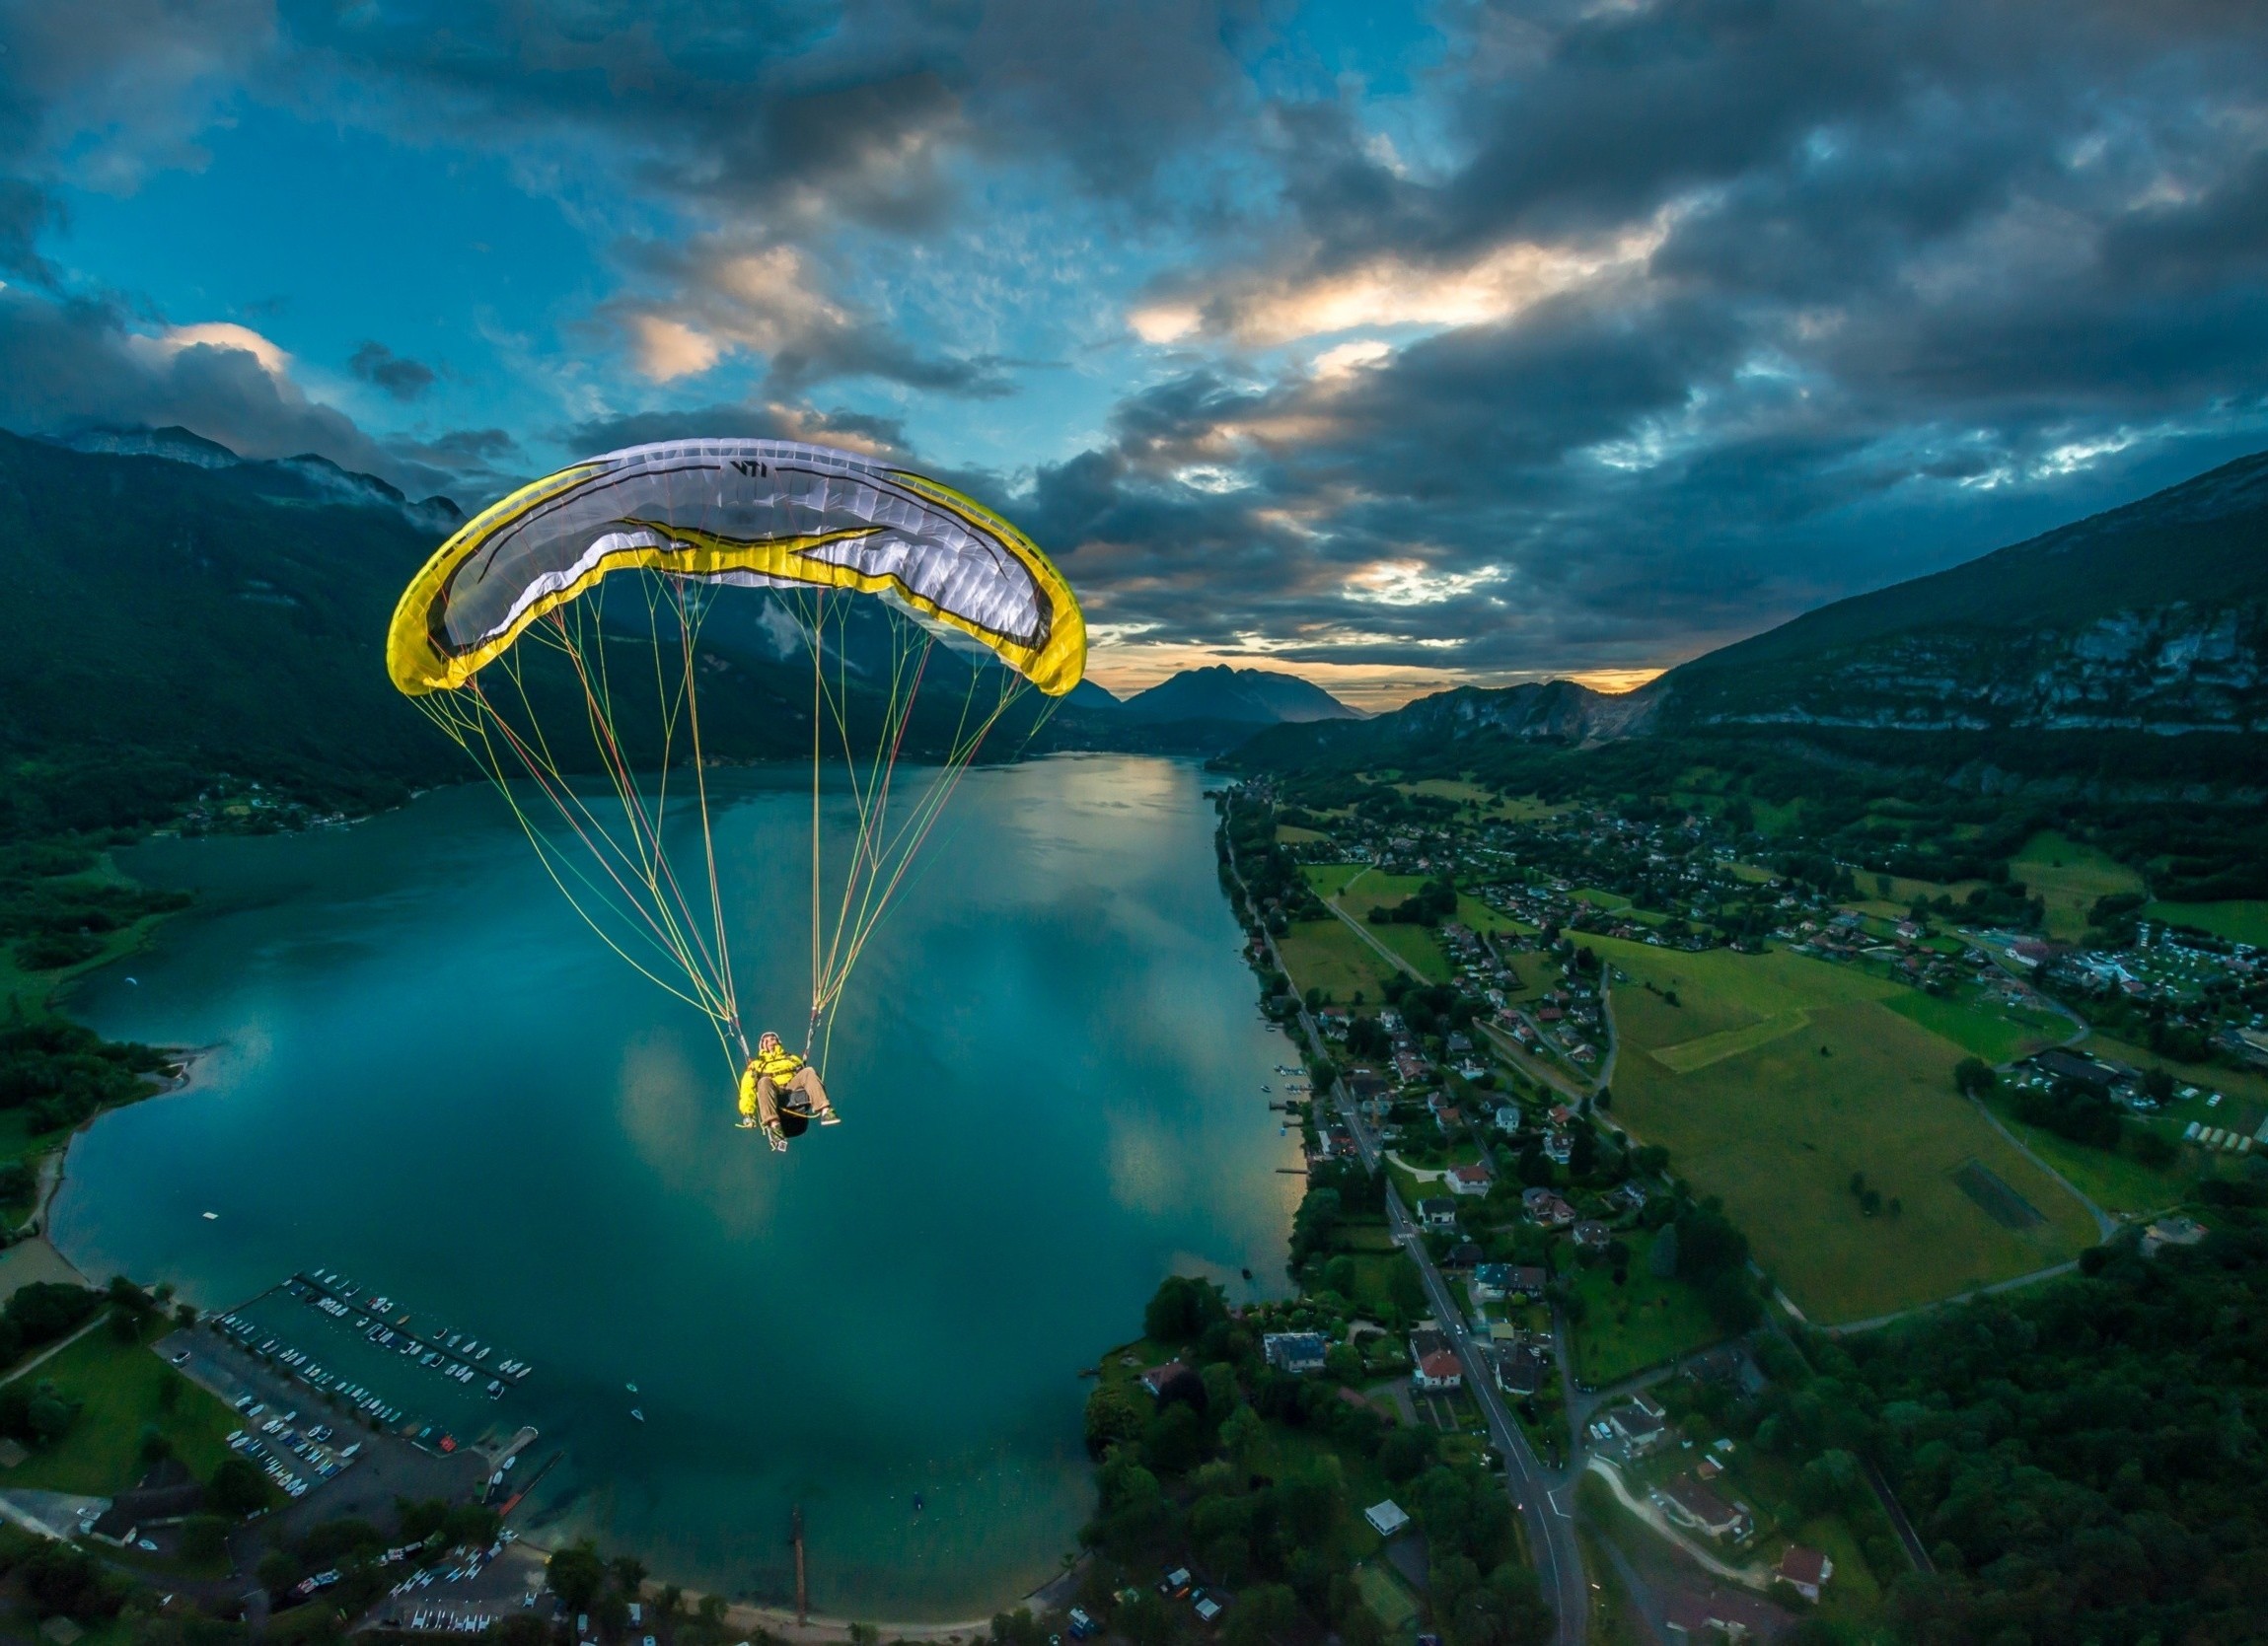 nature, Landscape, Flying, Paragliding, Lake, Mountain, City, Field, Sunset, Clouds, France Wallpaper